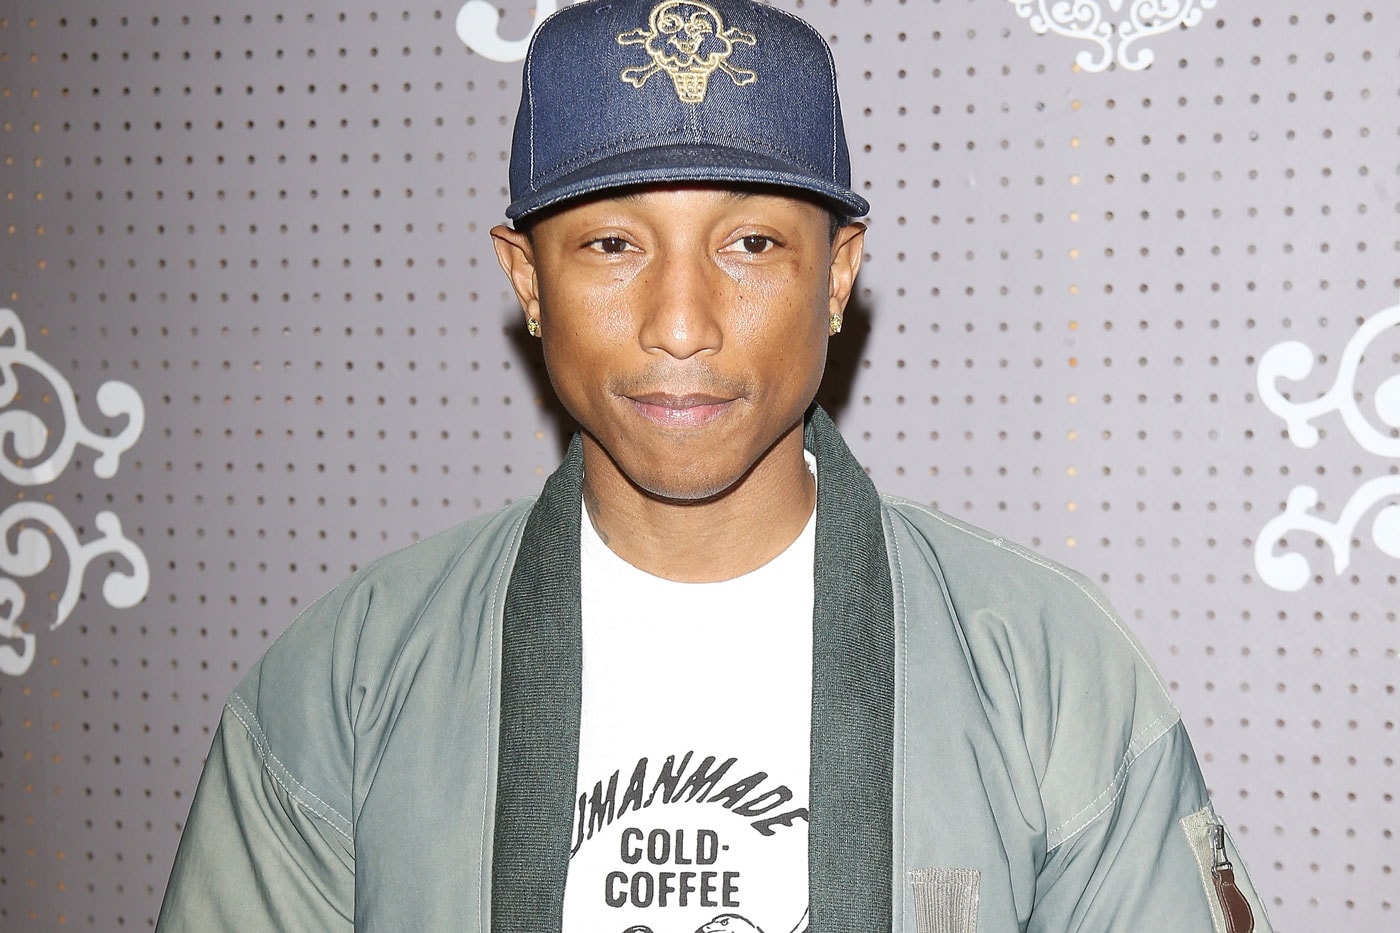 Could a New N.E.R.D. Album Be in the Works?